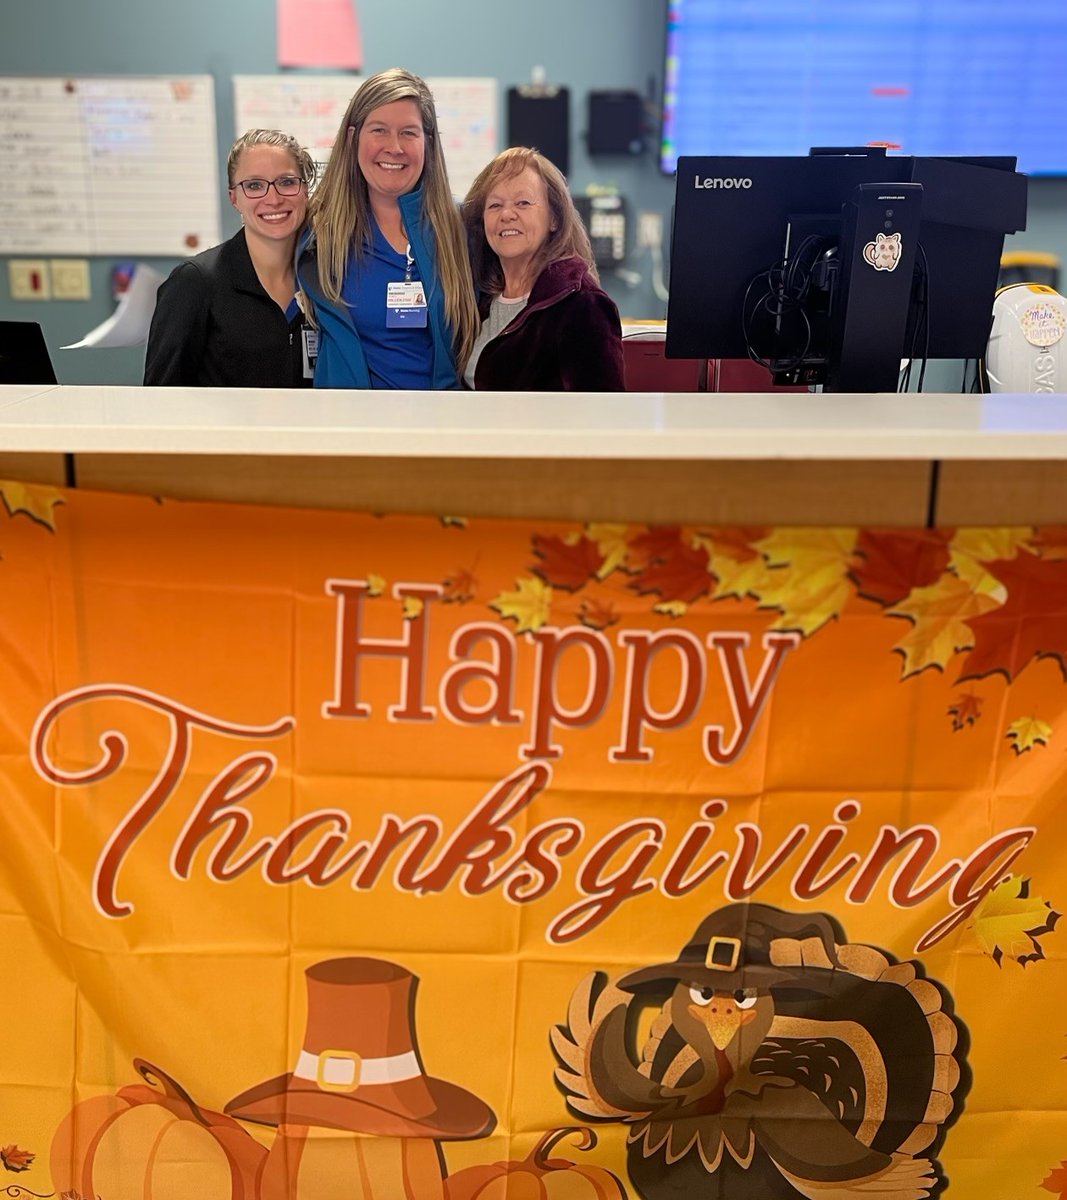 Happy Thanksgiving from all of us at Duke Regional Hospital. Pictured here are members of our dedicated ED team, getting into the holiday spirit! Stay safe and blessings to you and your family. #Thanksgiving2023